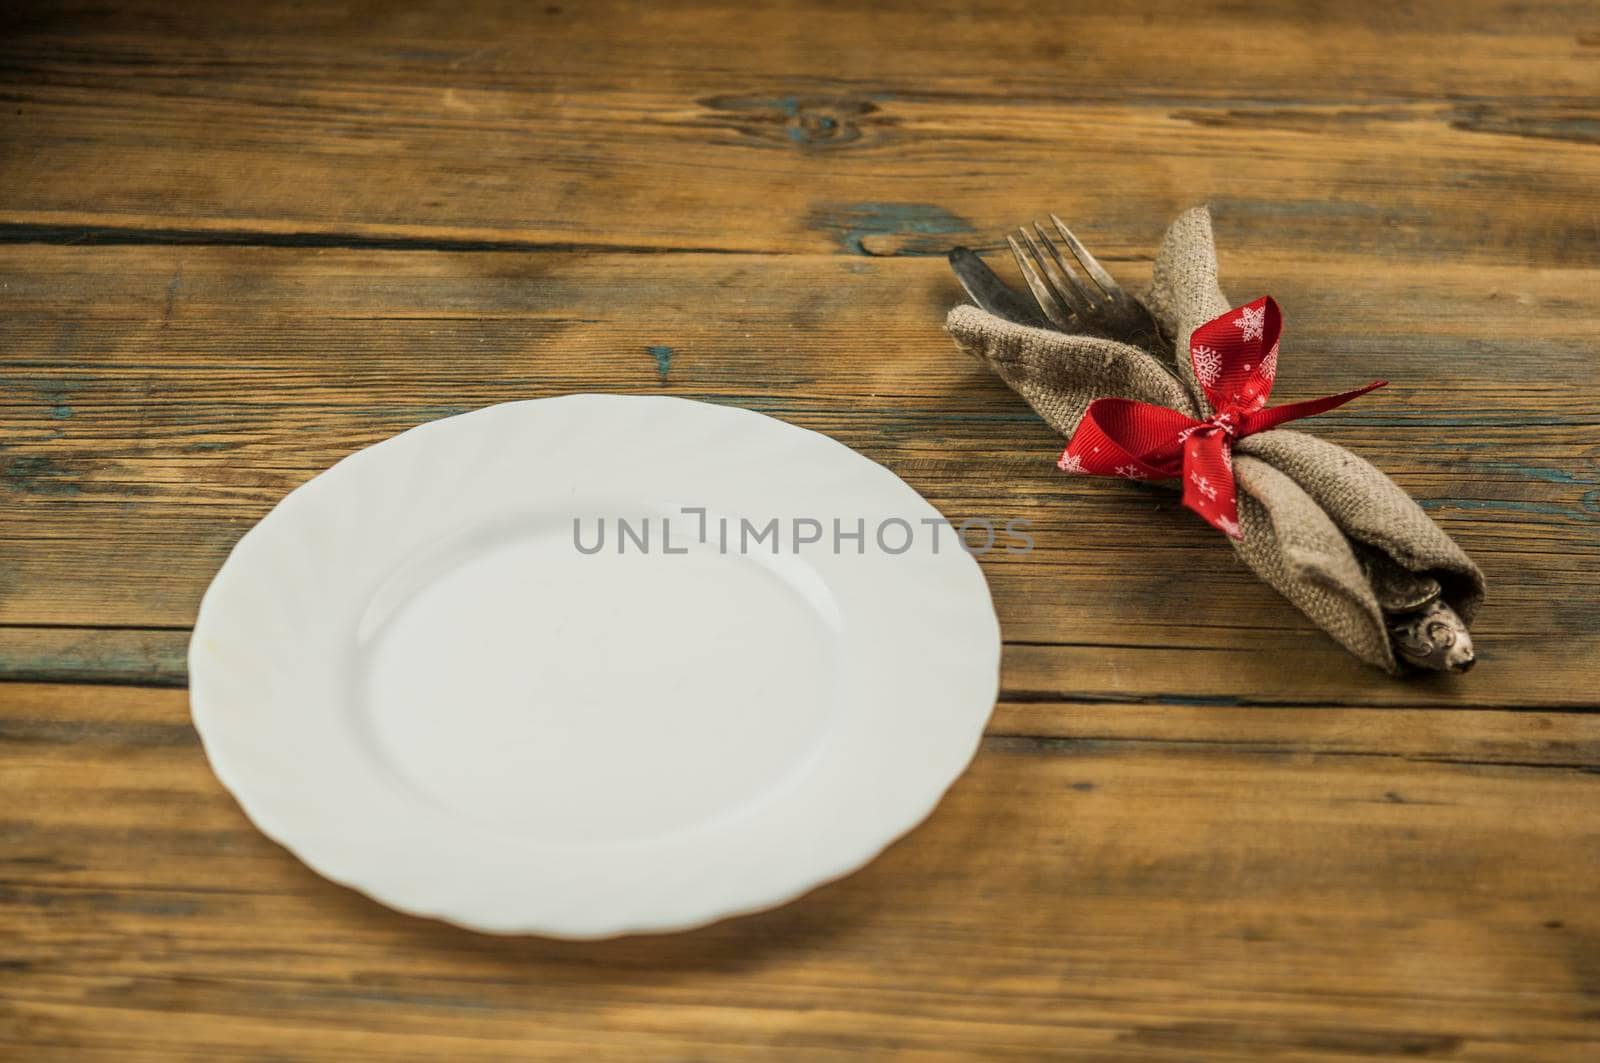 Festive composition with empty white plate and cutlery set on rustic wooden table. Christmas holiday.